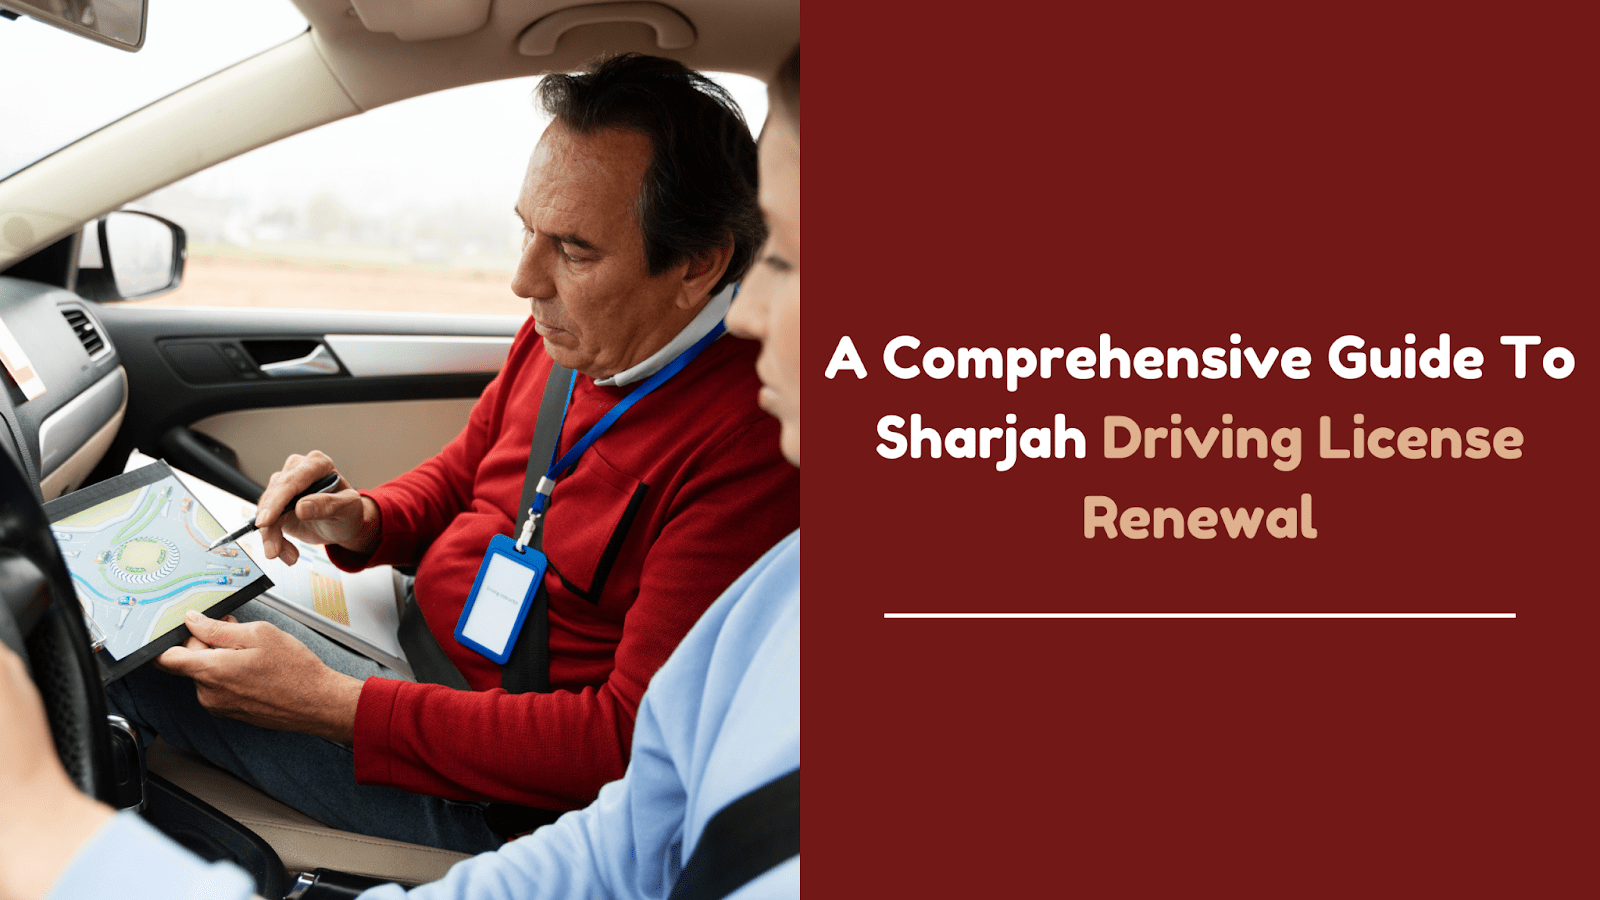 How to Renew Your Driving License in Sharjah?